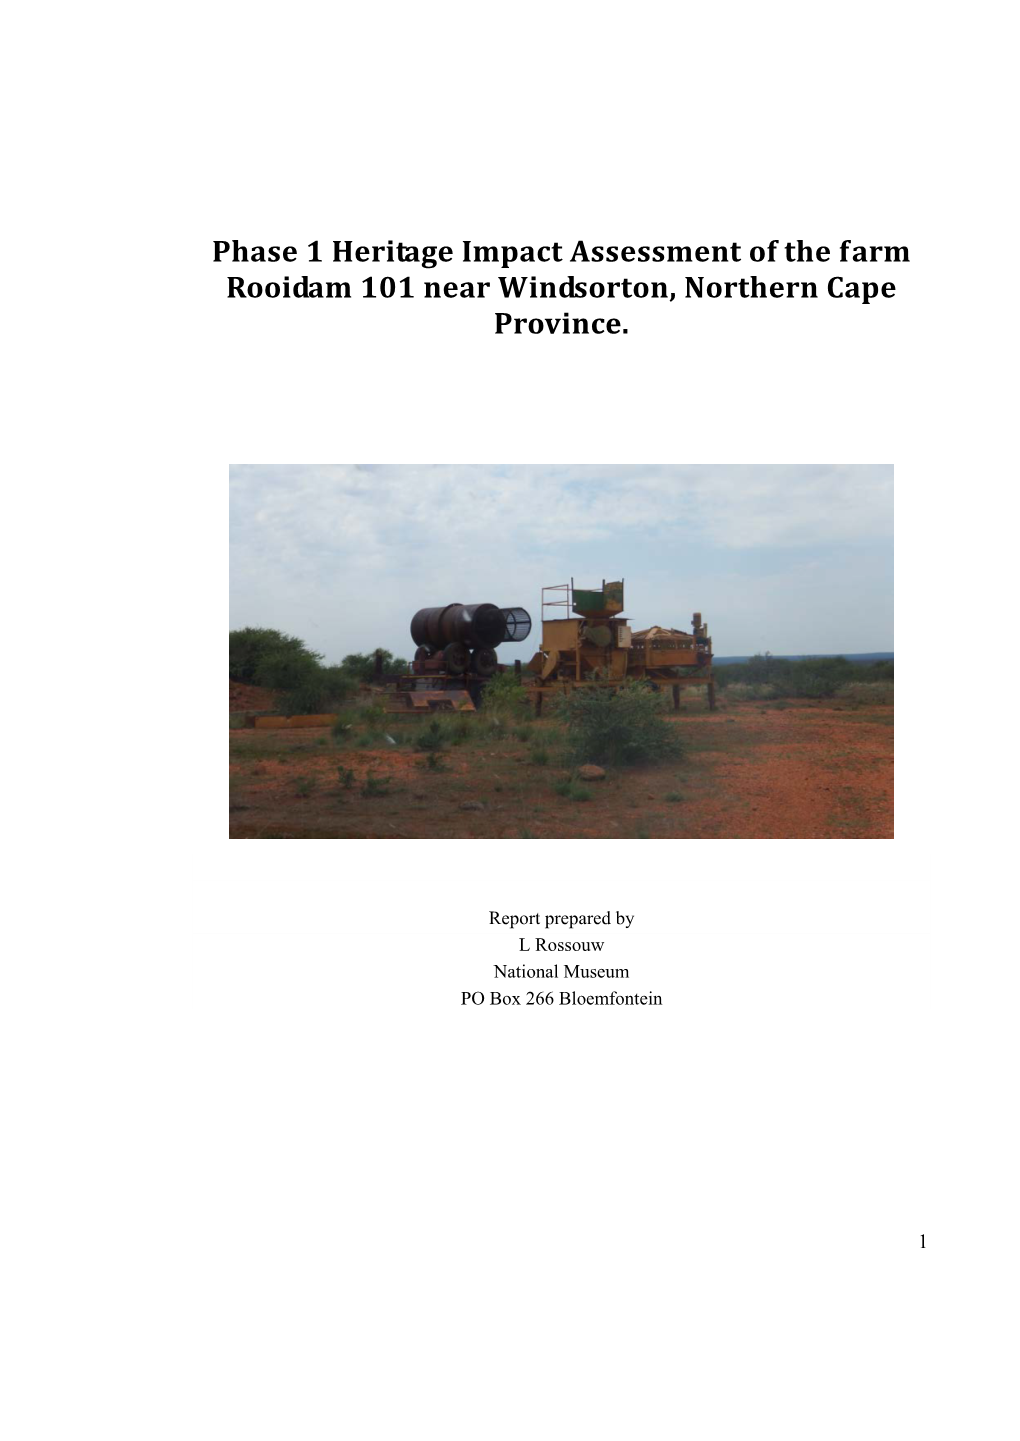 Phase 1 Heritage Impact Assessment of the Farm Rooidam 101 Near Windsorton, Northern Cape Province